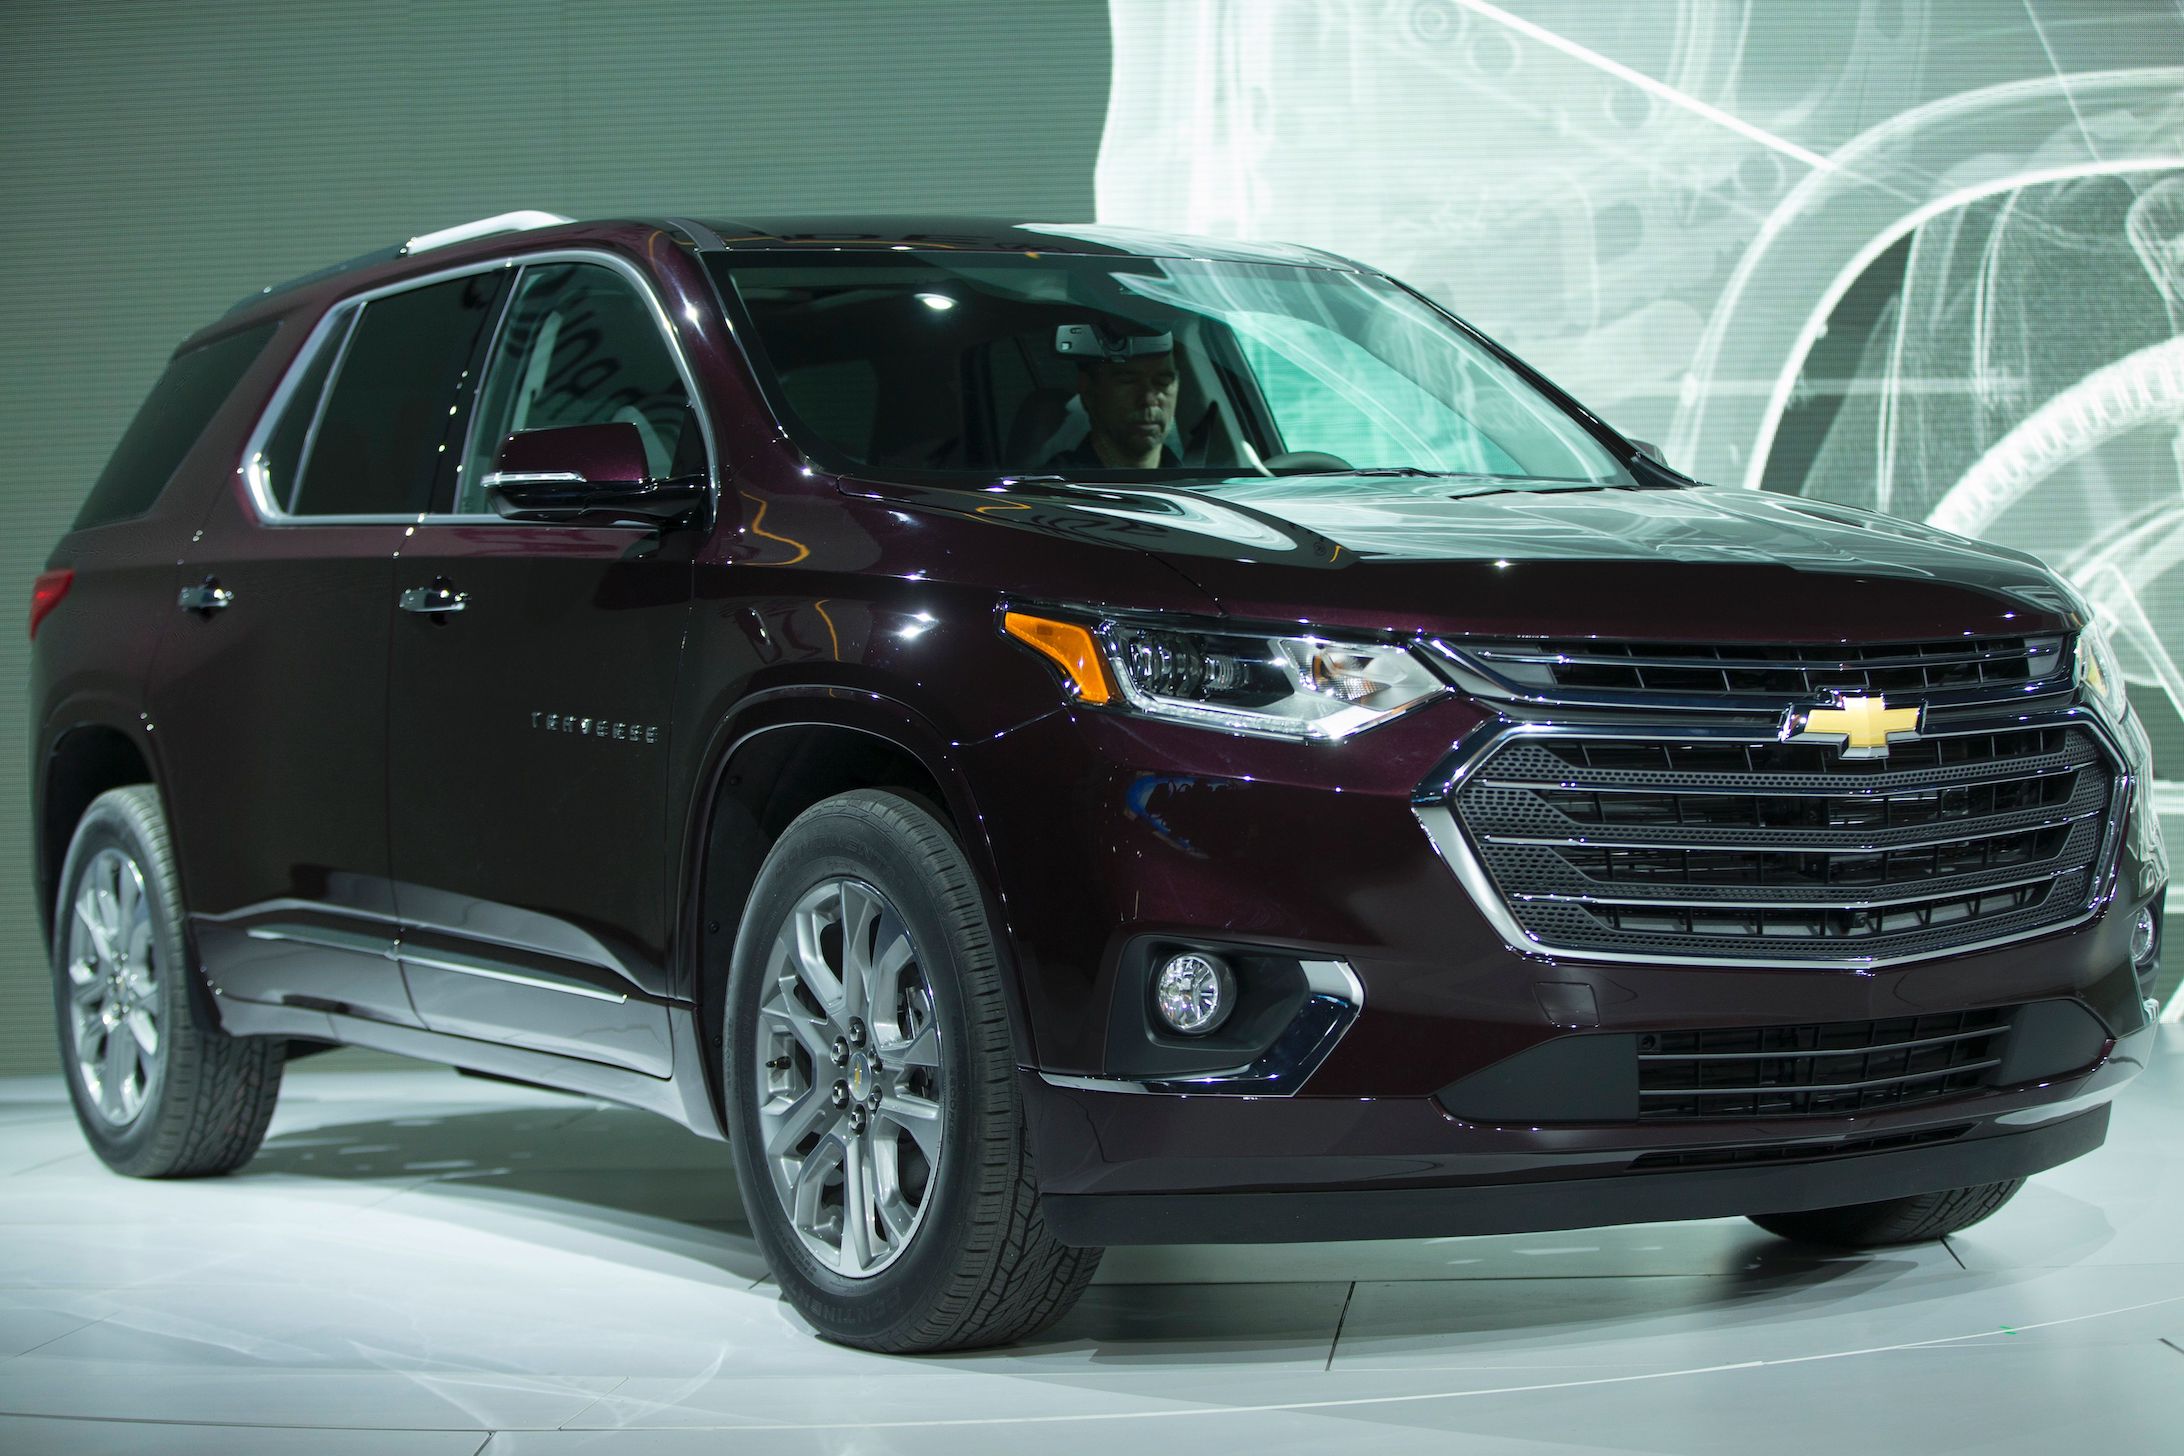 The Chevrolet Traverse – sibling to the Tahoe and Suburban – on display at the North American International Auto Show